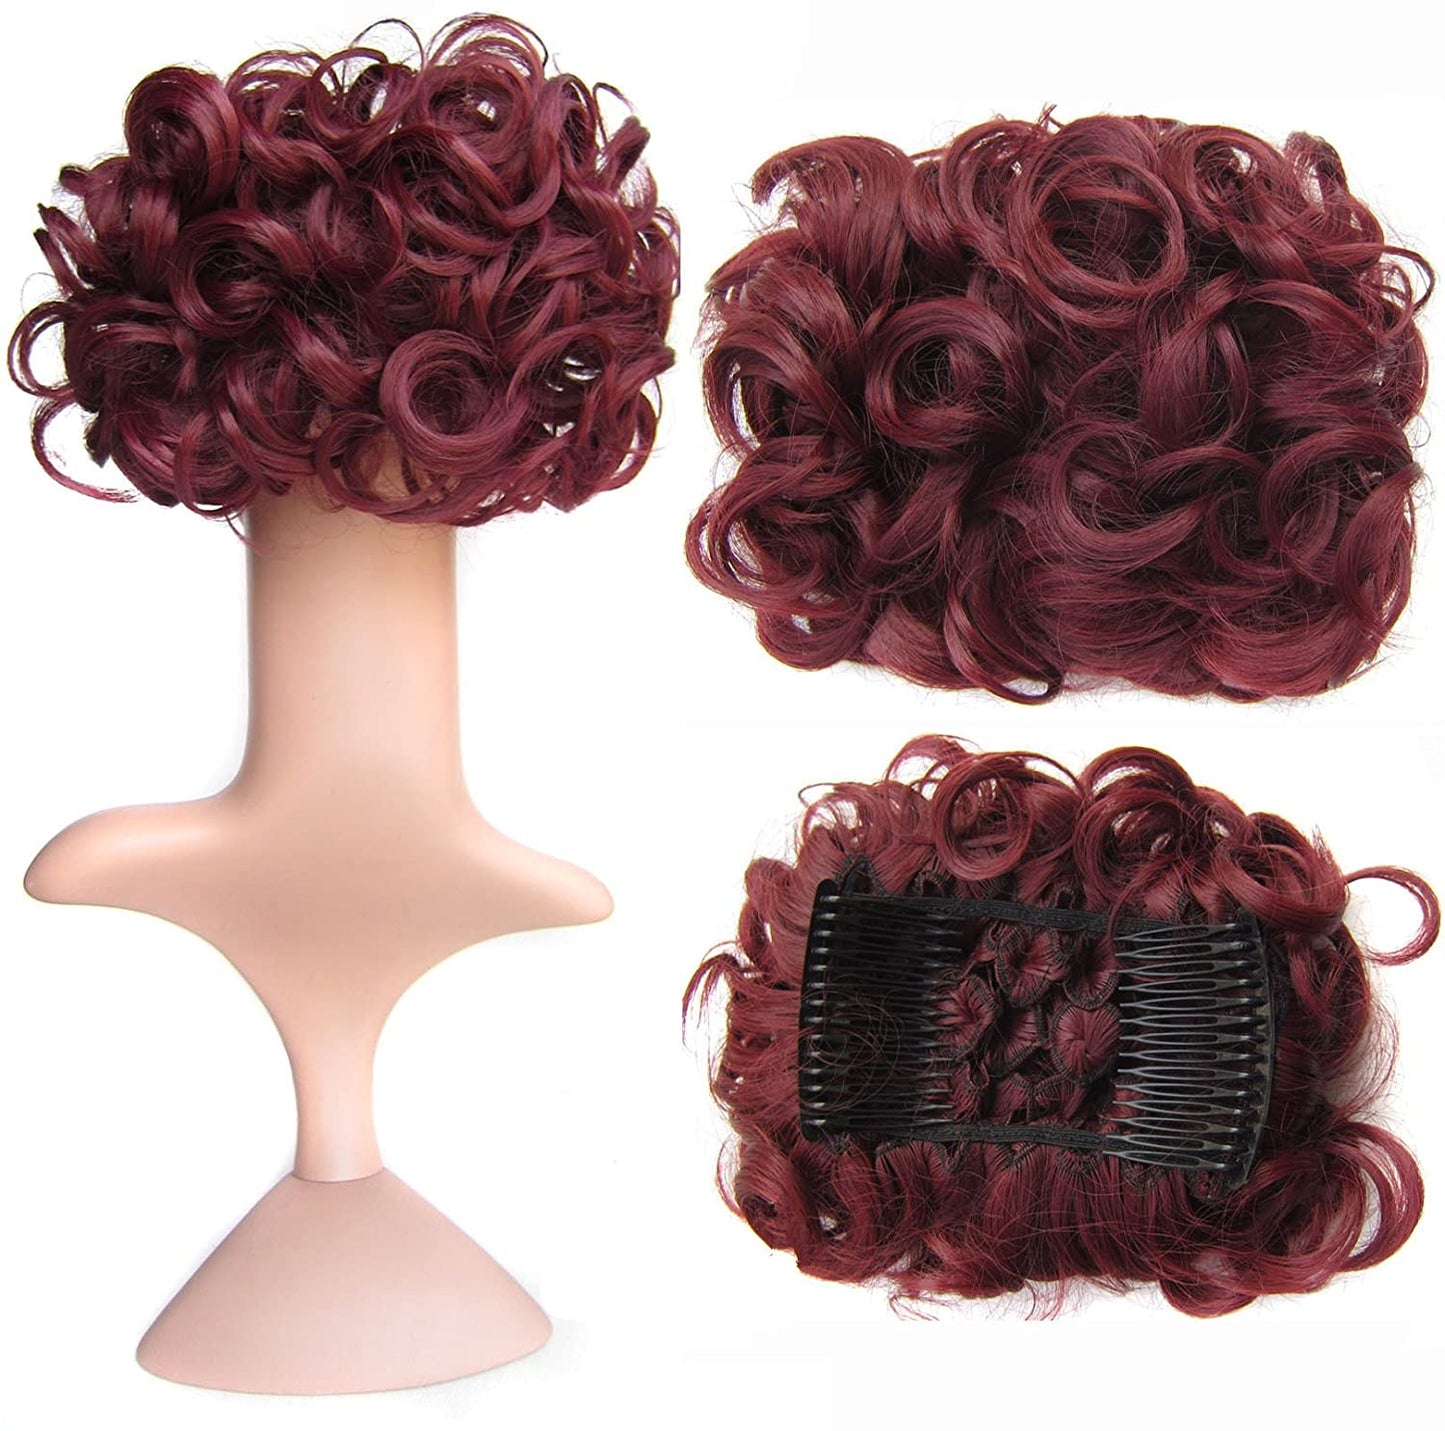 Short Messy Curly Dish Hair Bun Extension【Buy 2 for free shipping】